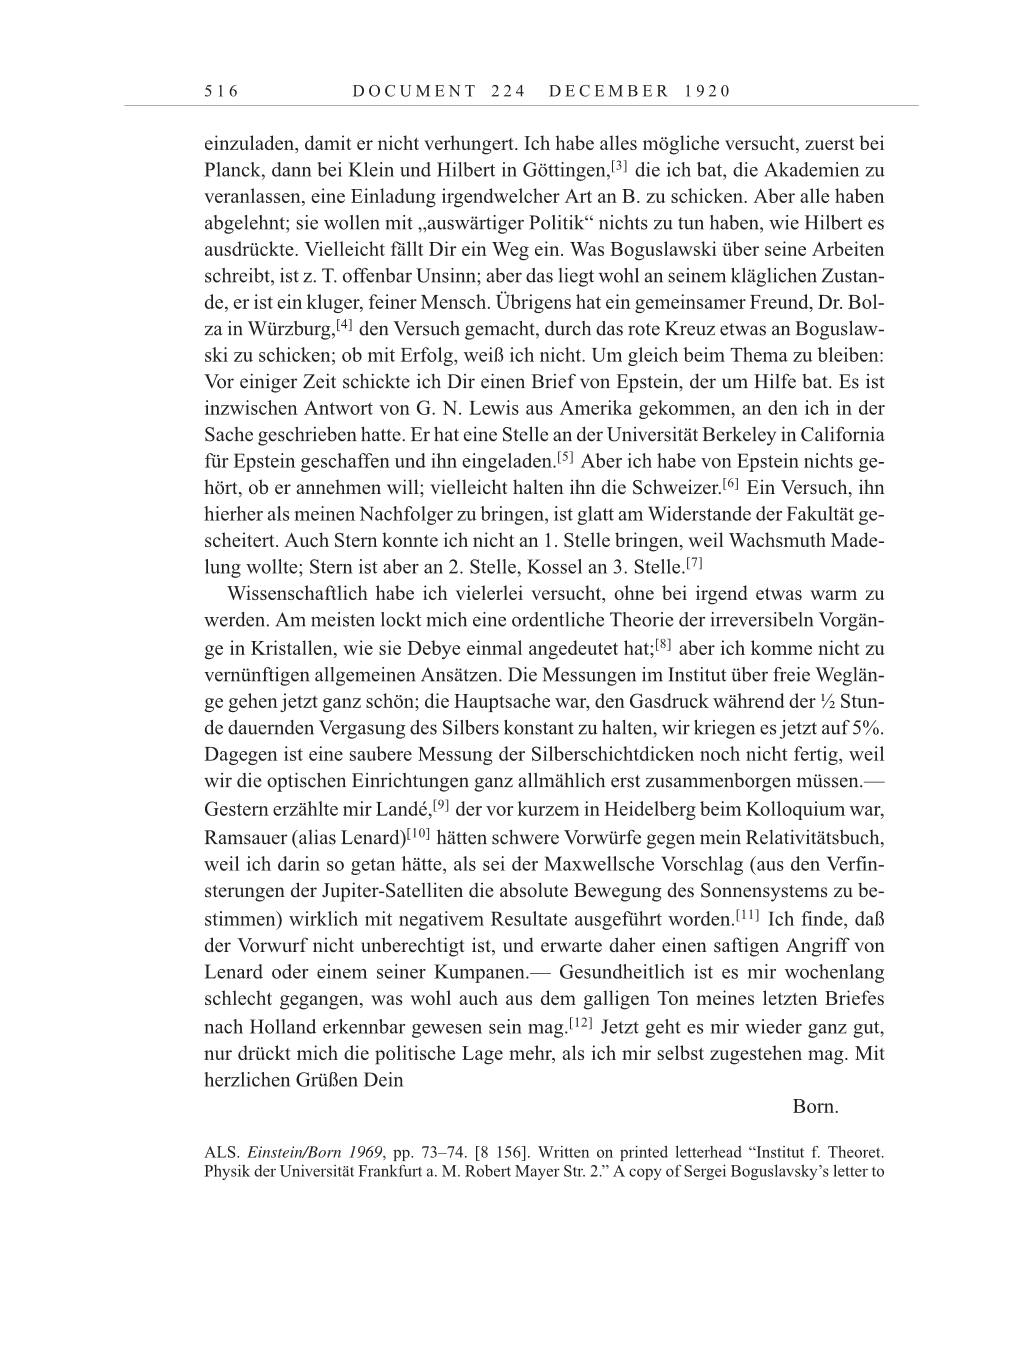 Volume 10: The Berlin Years: Correspondence May-December 1920 / Supplementary Correspondence 1909-1920 page 516